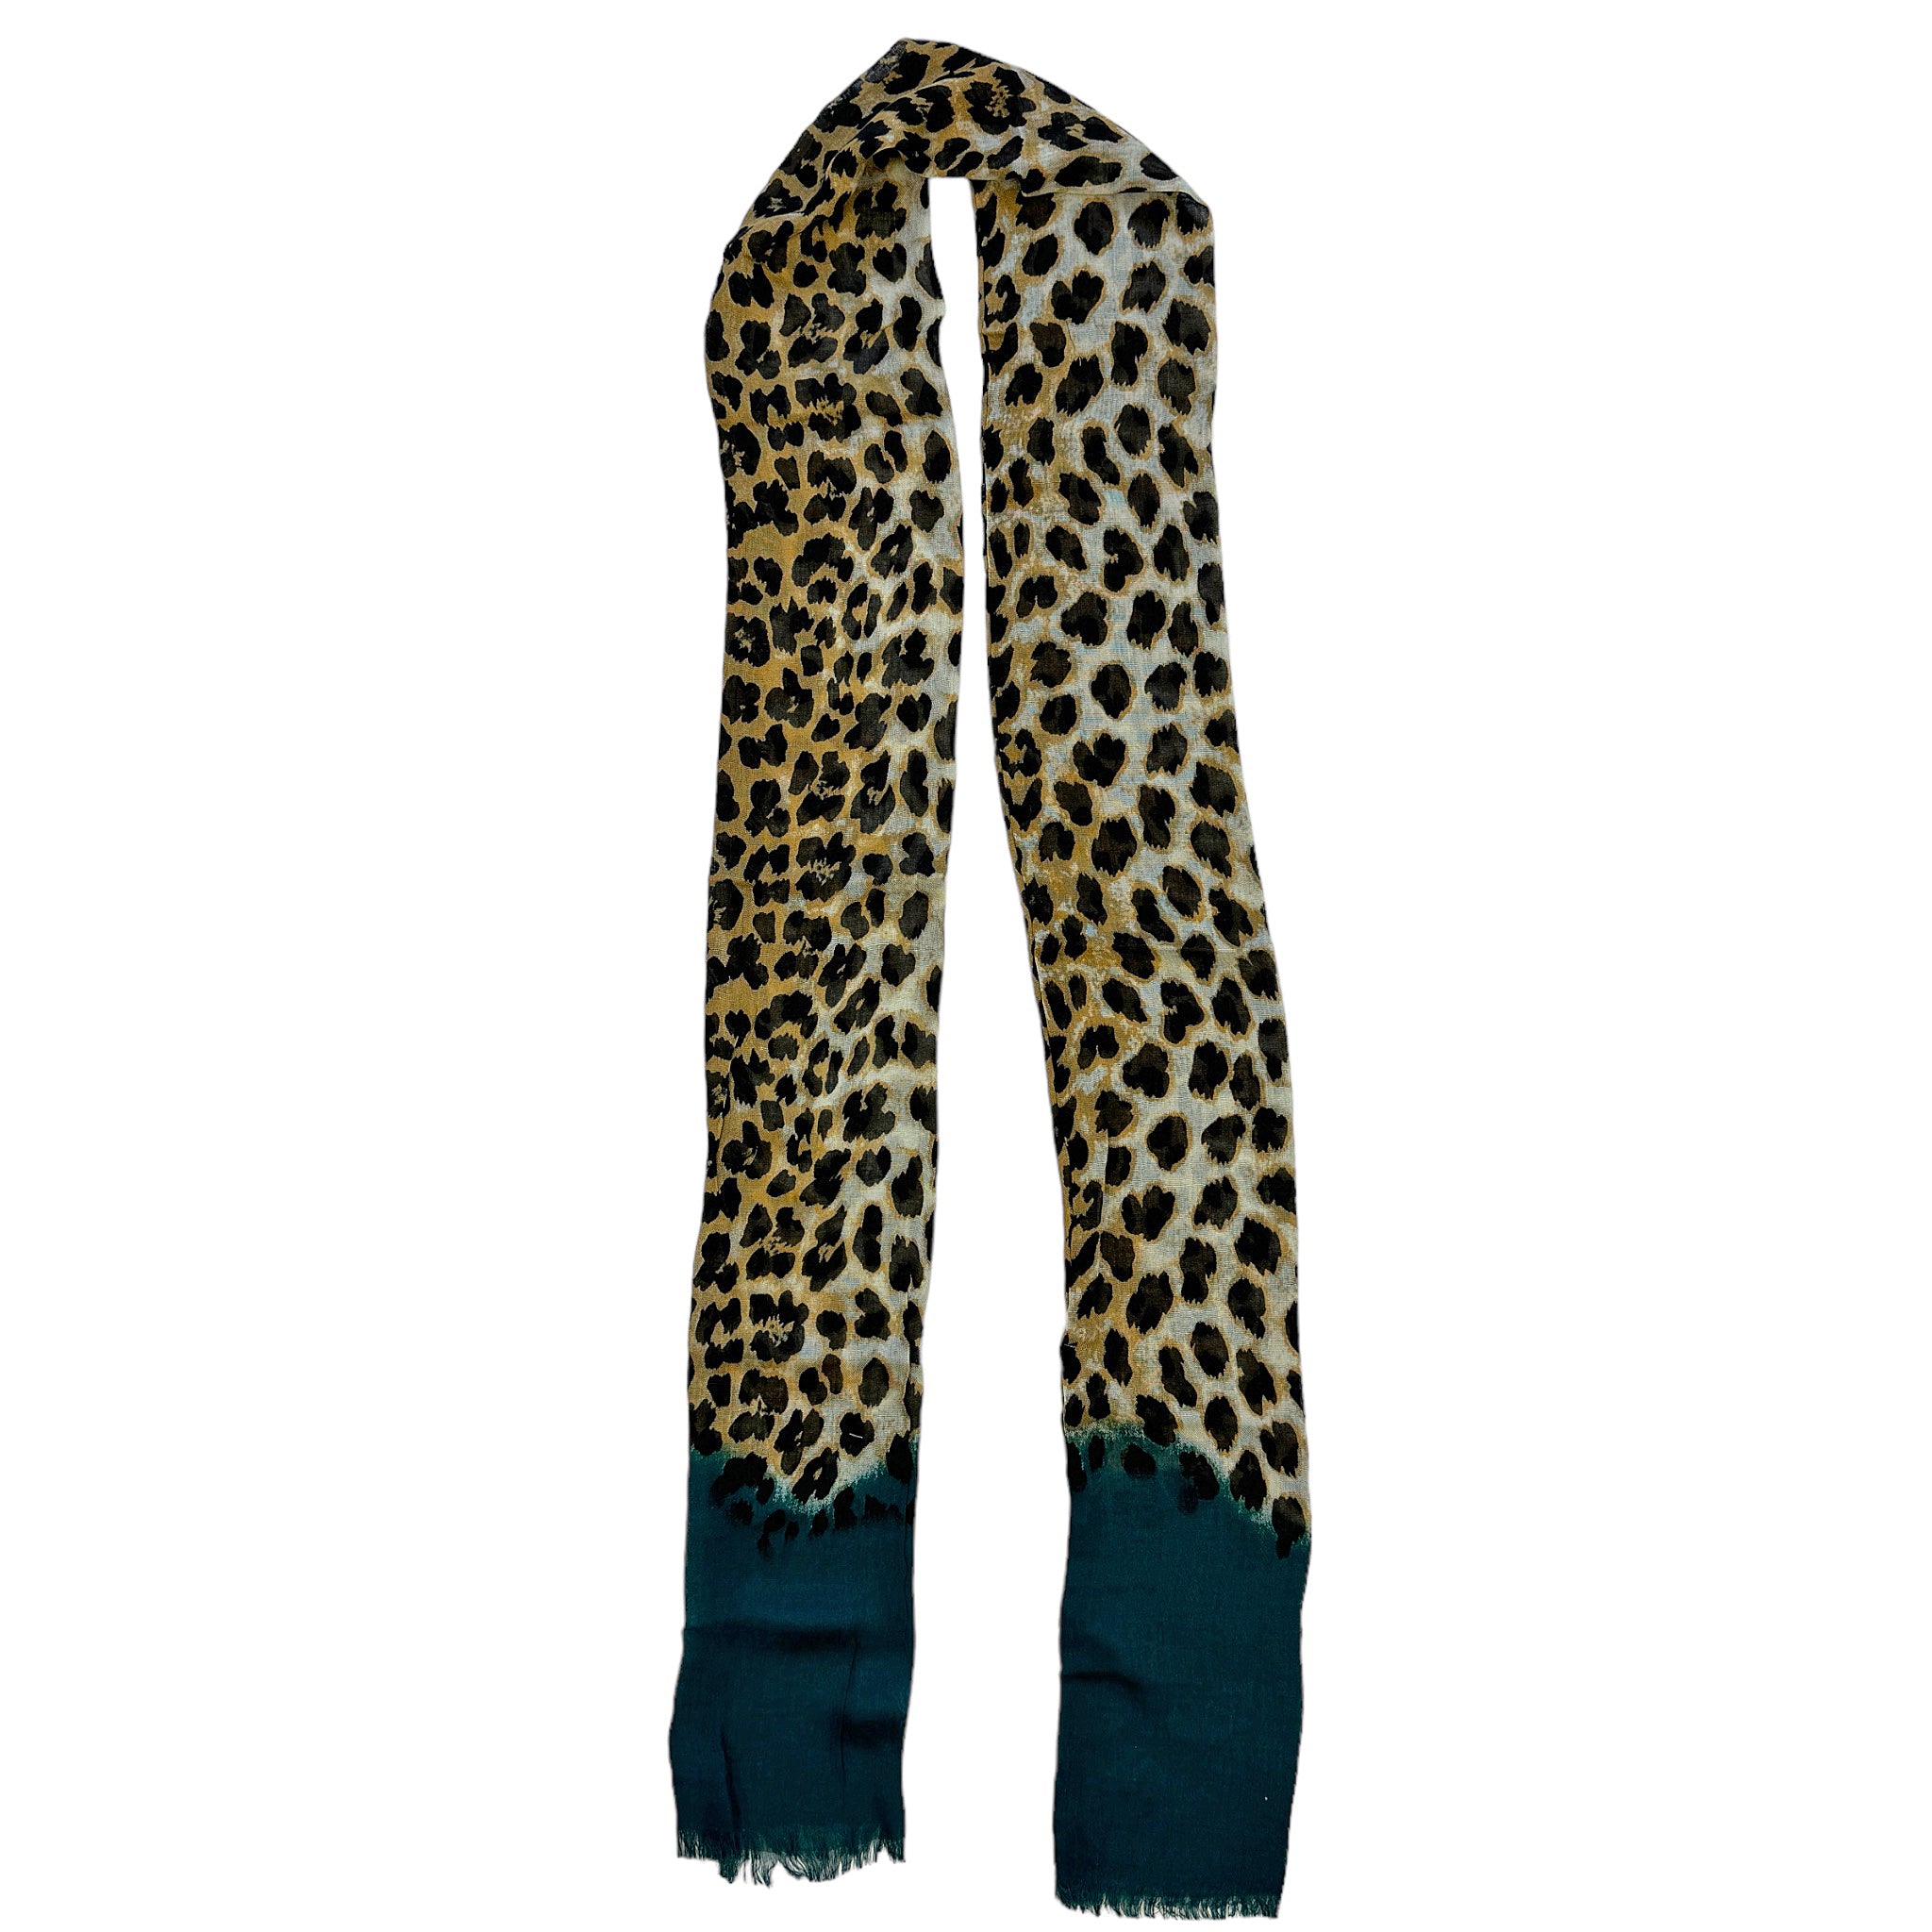 Blue Pacific Animal Print Cashmere Silk Skinny Tube Scarf in Teal Blue and Tan